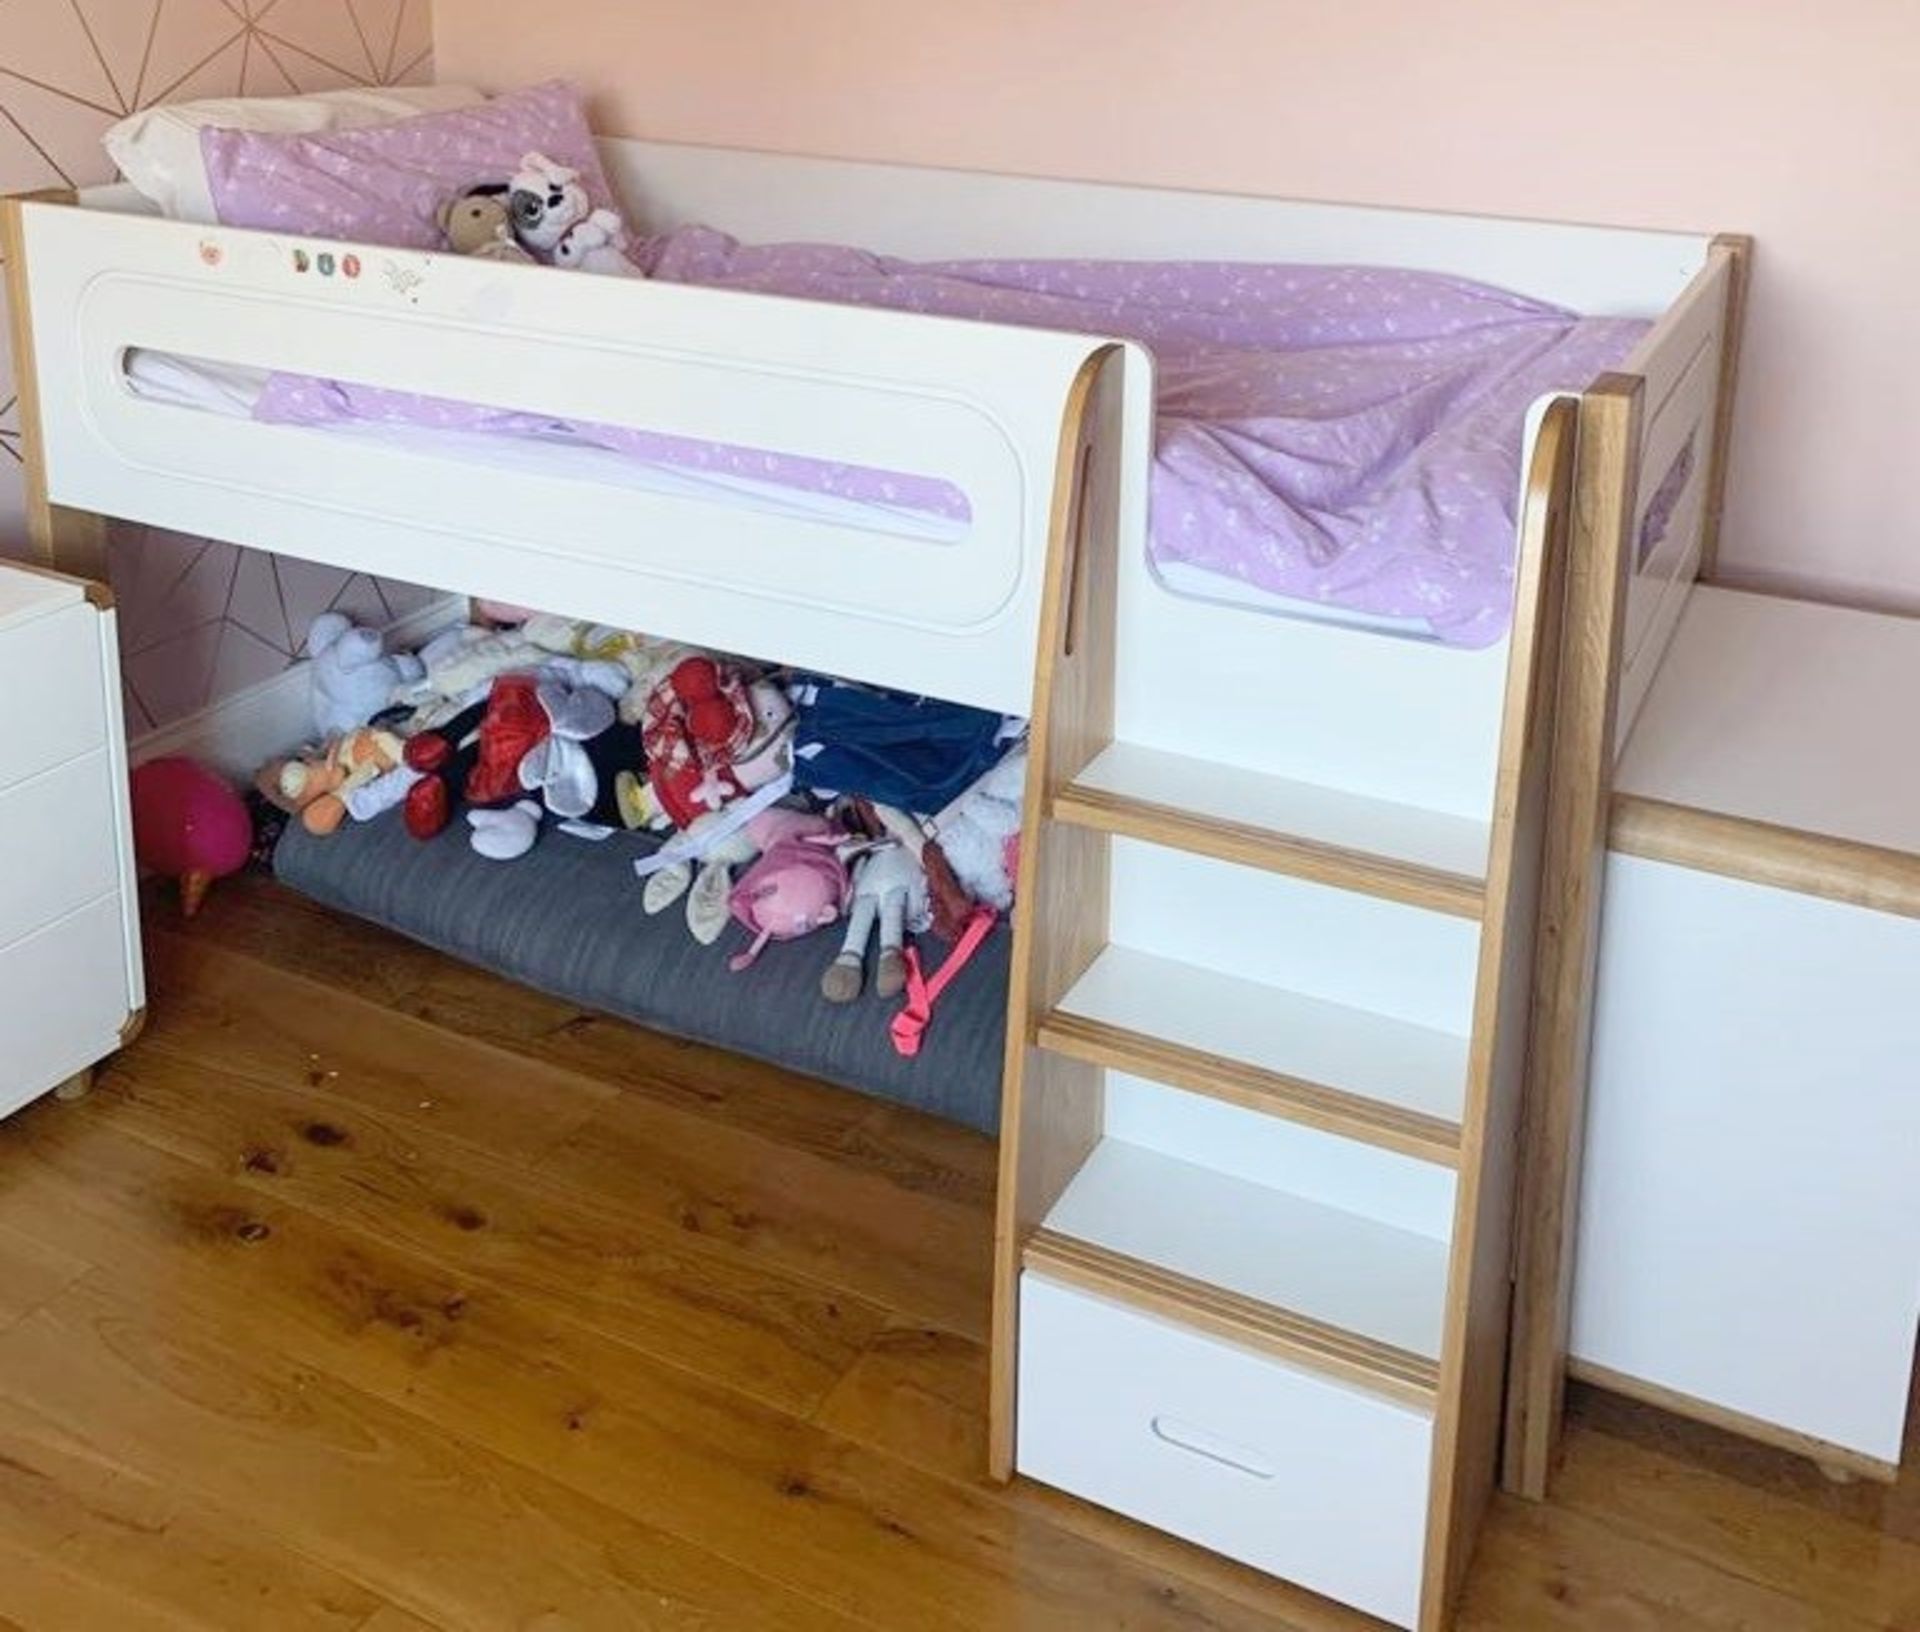 1 x 4-Piece STOMPA 'Curve' Children's Premium Bedroom Set Includes Mid Sleeper Bed In A White & - Image 5 of 9